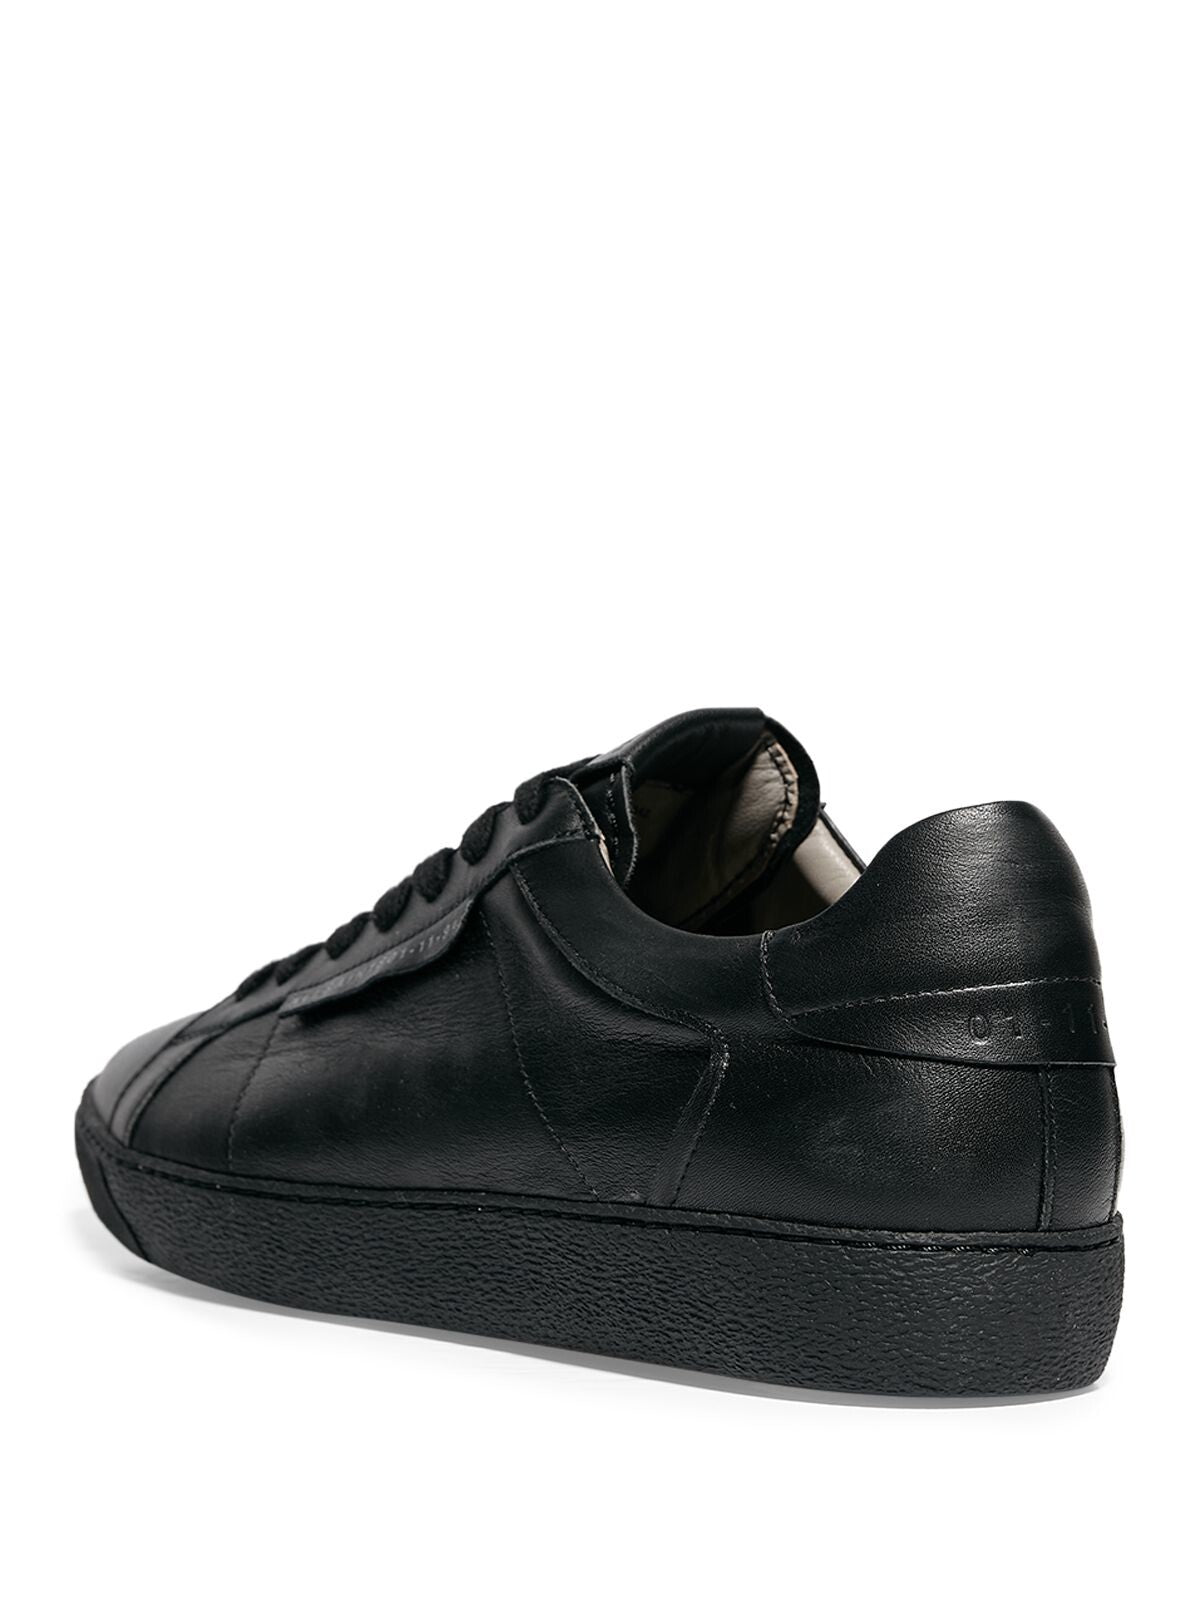 ALLSAINTS Mens Black Removable Insole Logo Sheer Round Toe Platform Lace-Up Leather Athletic Sneakers 43